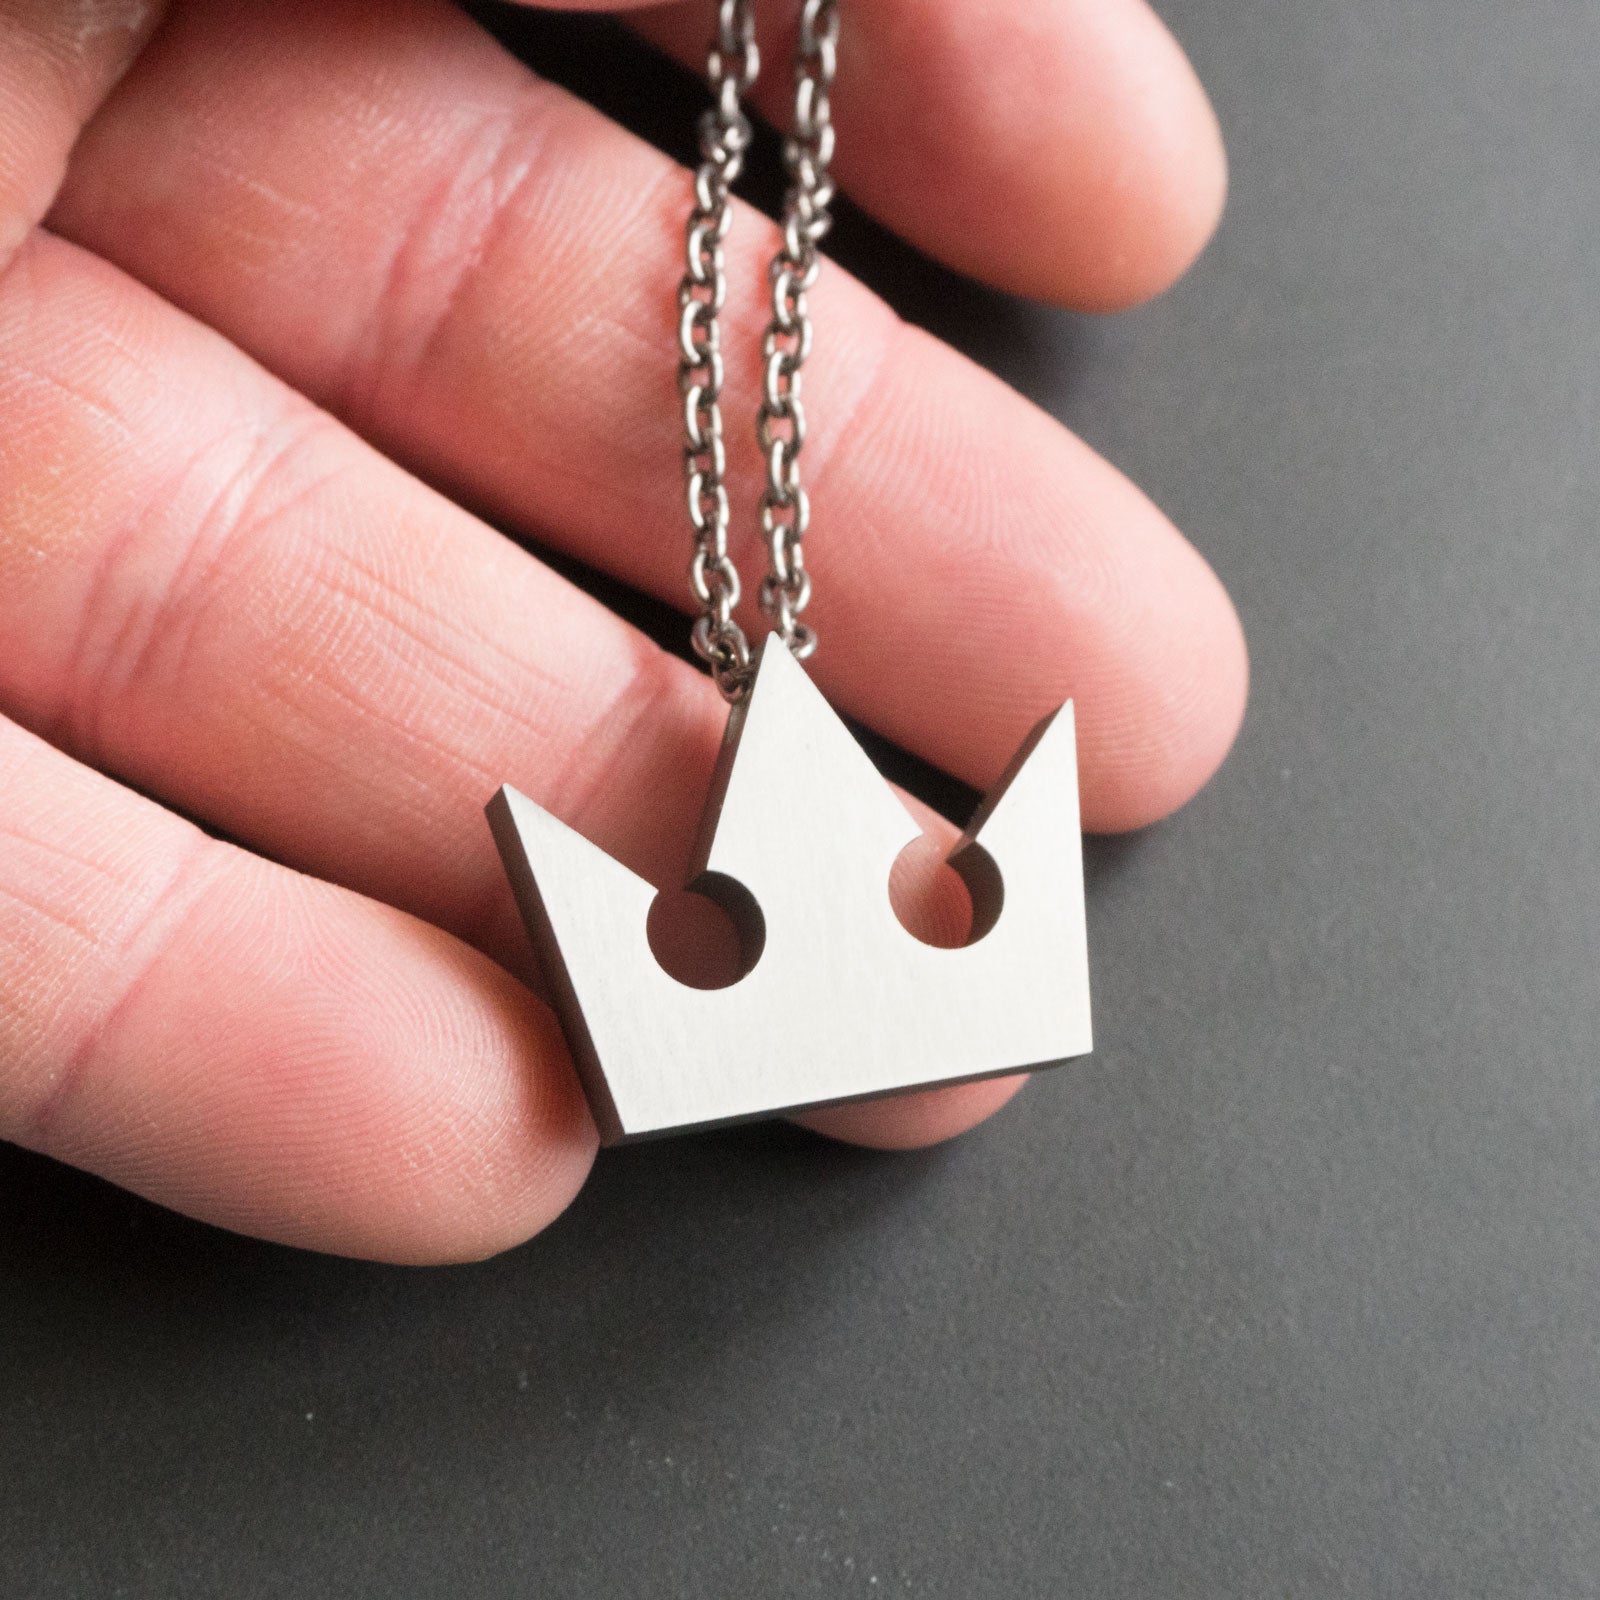 Create a Chain of Memories With Kingdom Hearts Jewelry - Interest - Anime  News Network